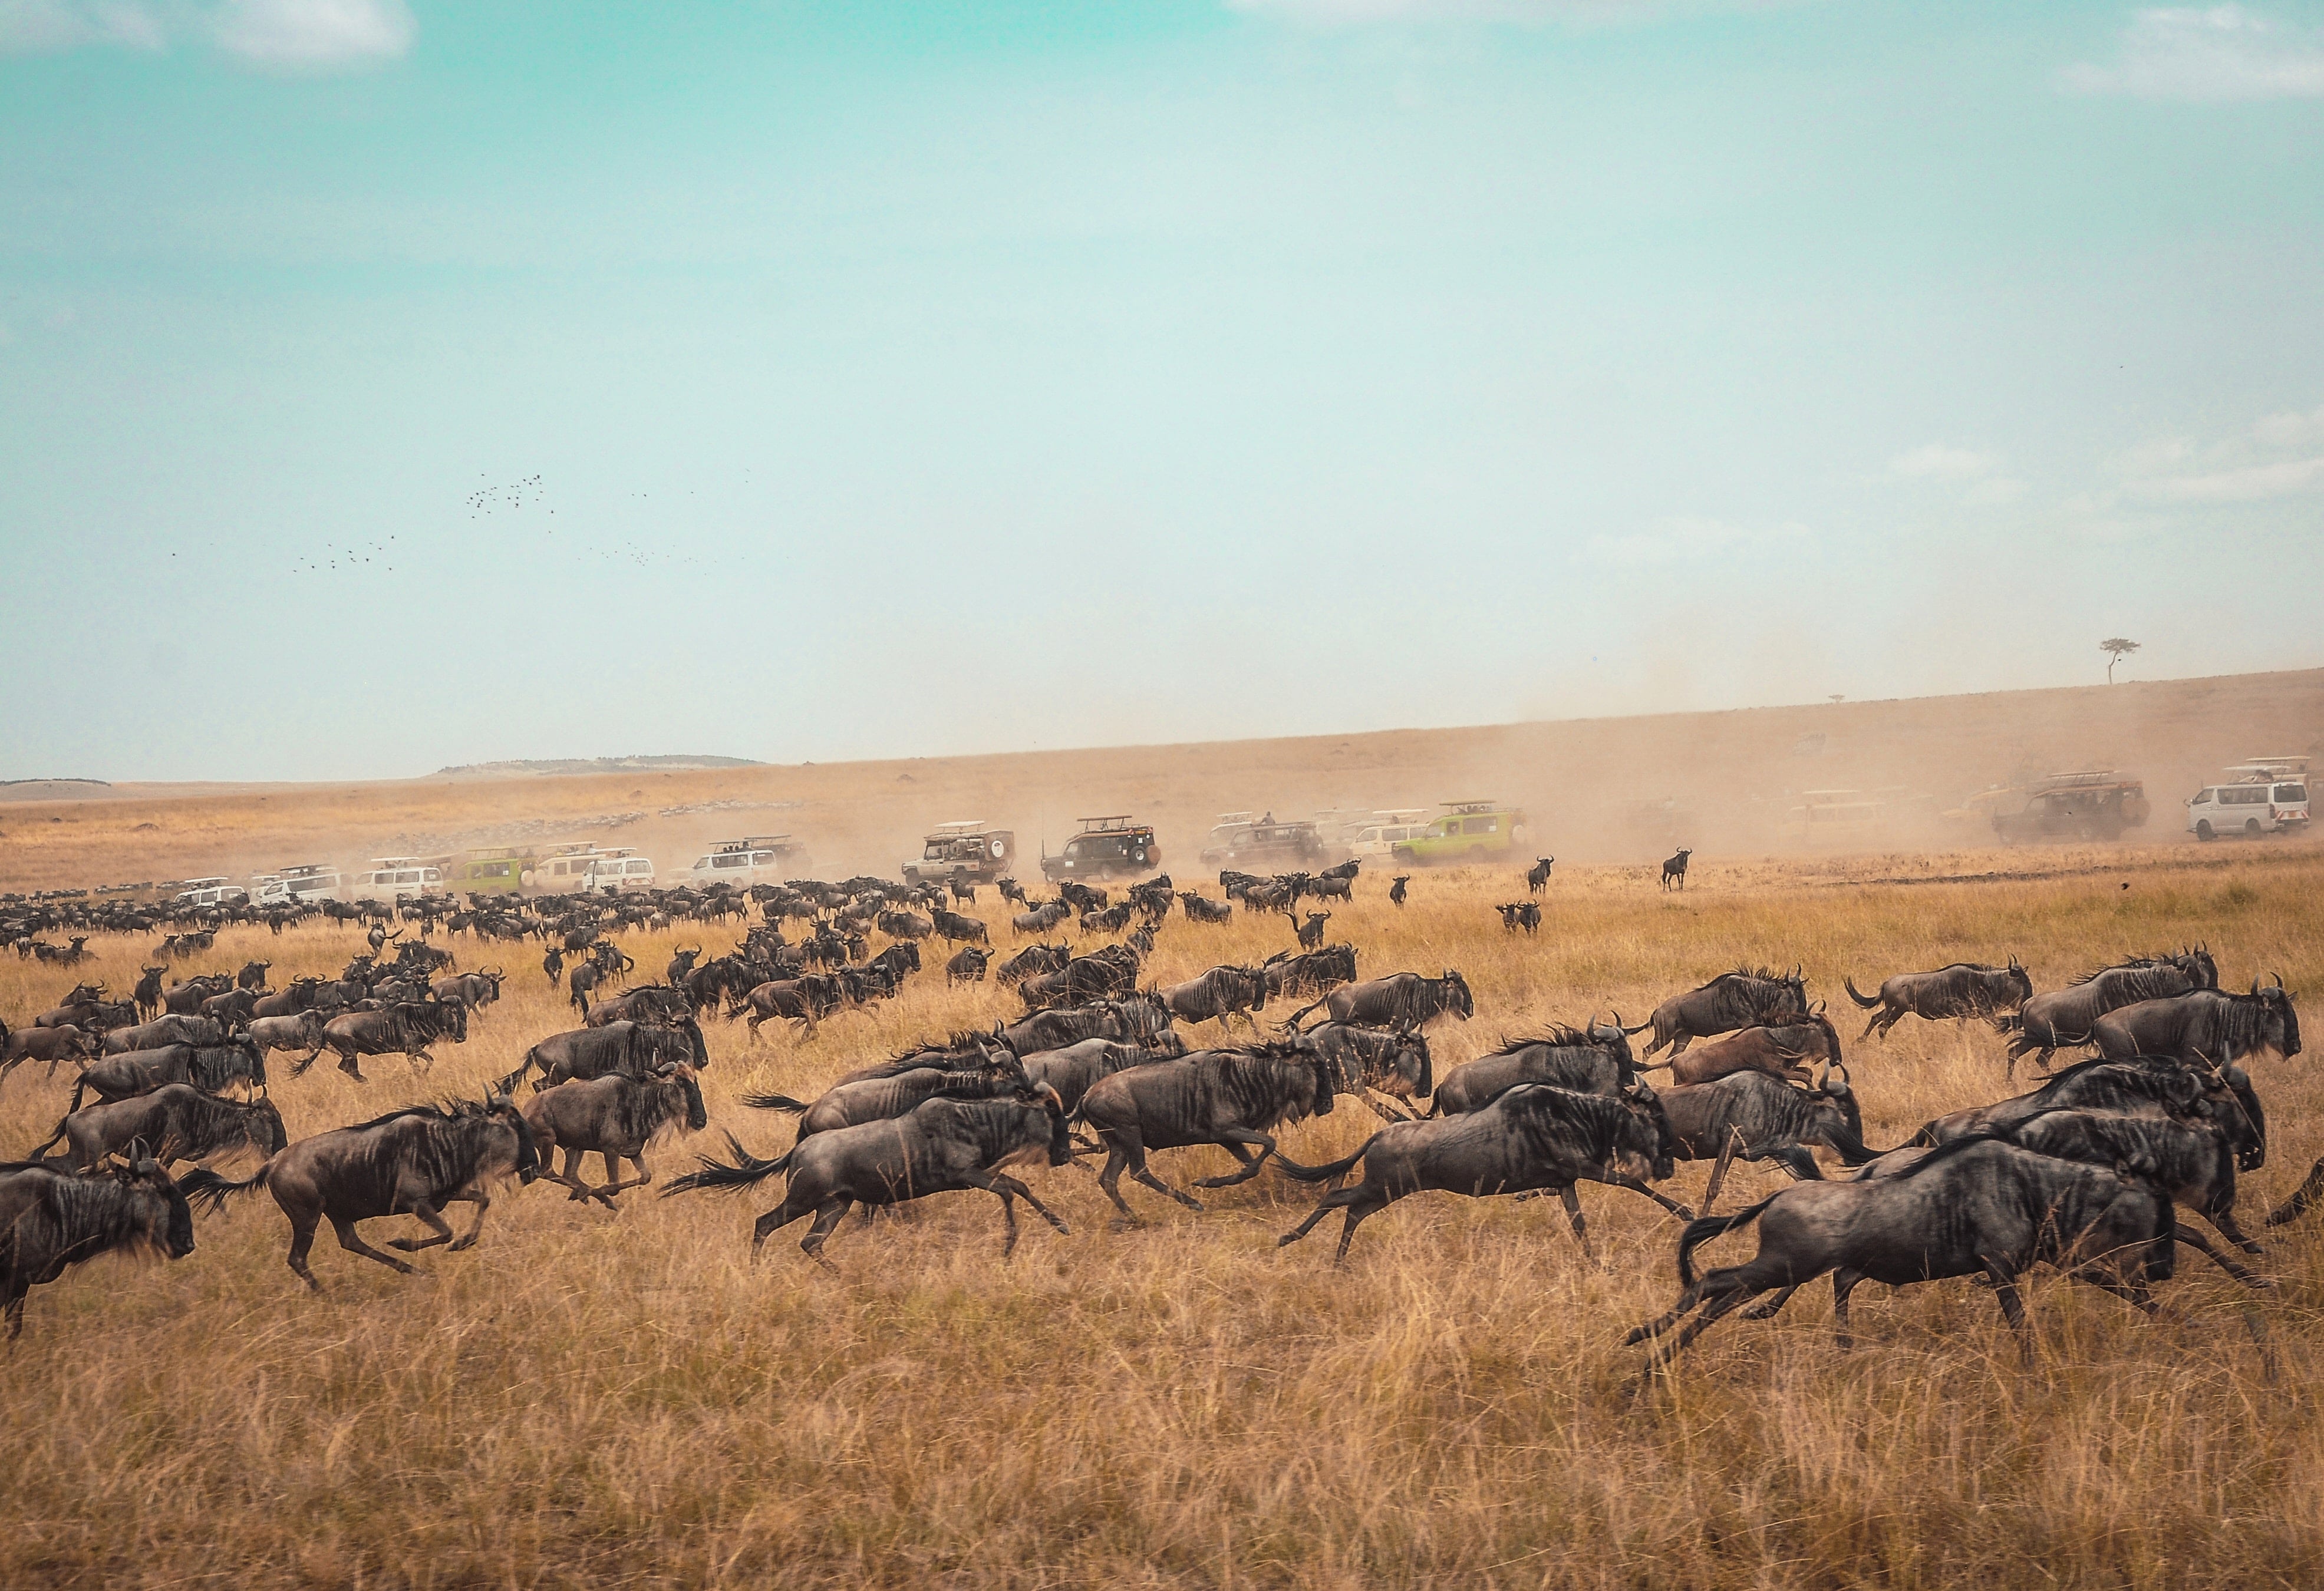 eXp Realty news: the great migration - image of zebras running in field